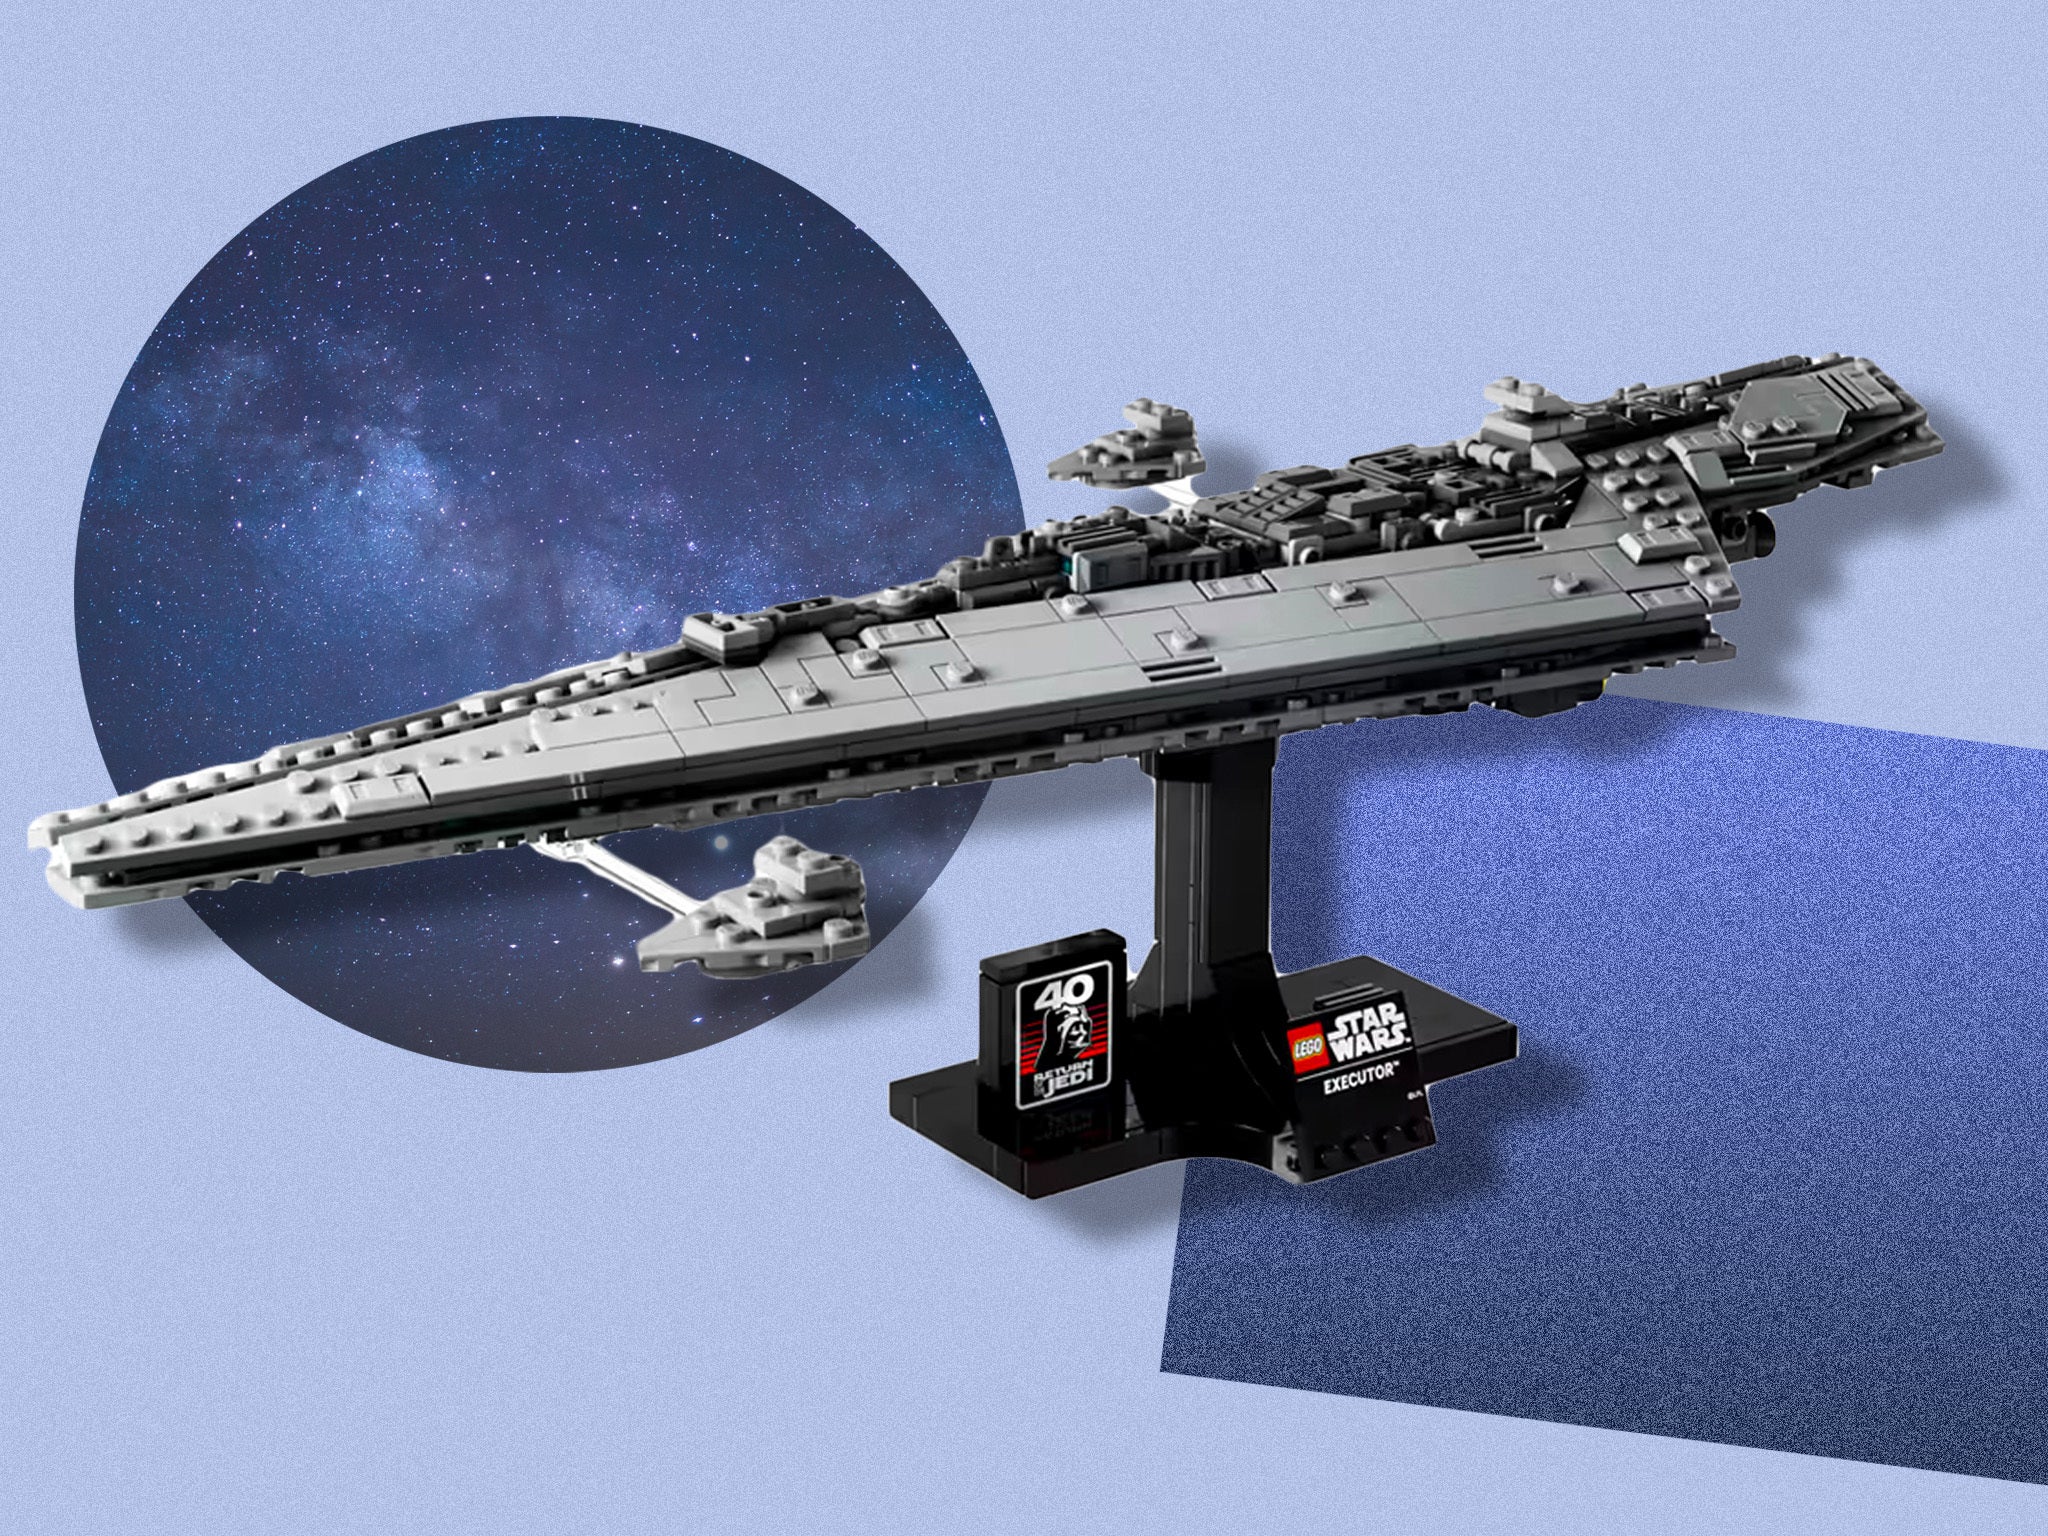 Lego Star Wars super star destroyer Price, release date more The Independent